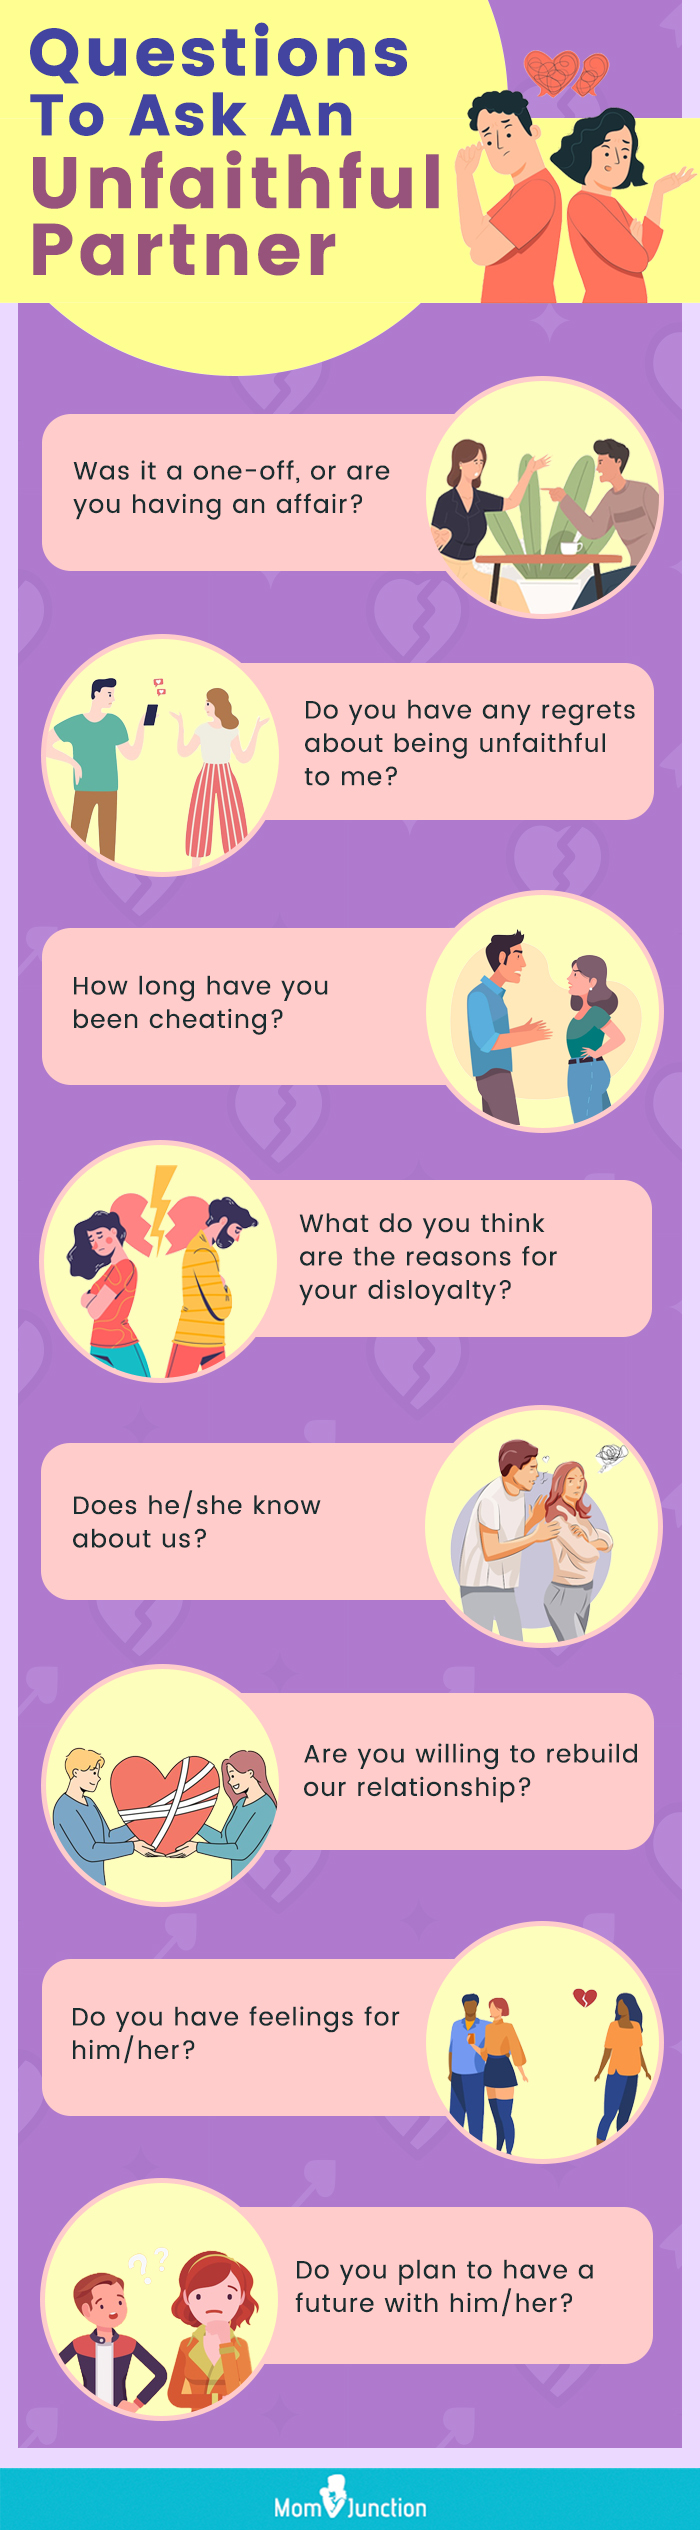 questions to ask an unfaithful partner [infographic]